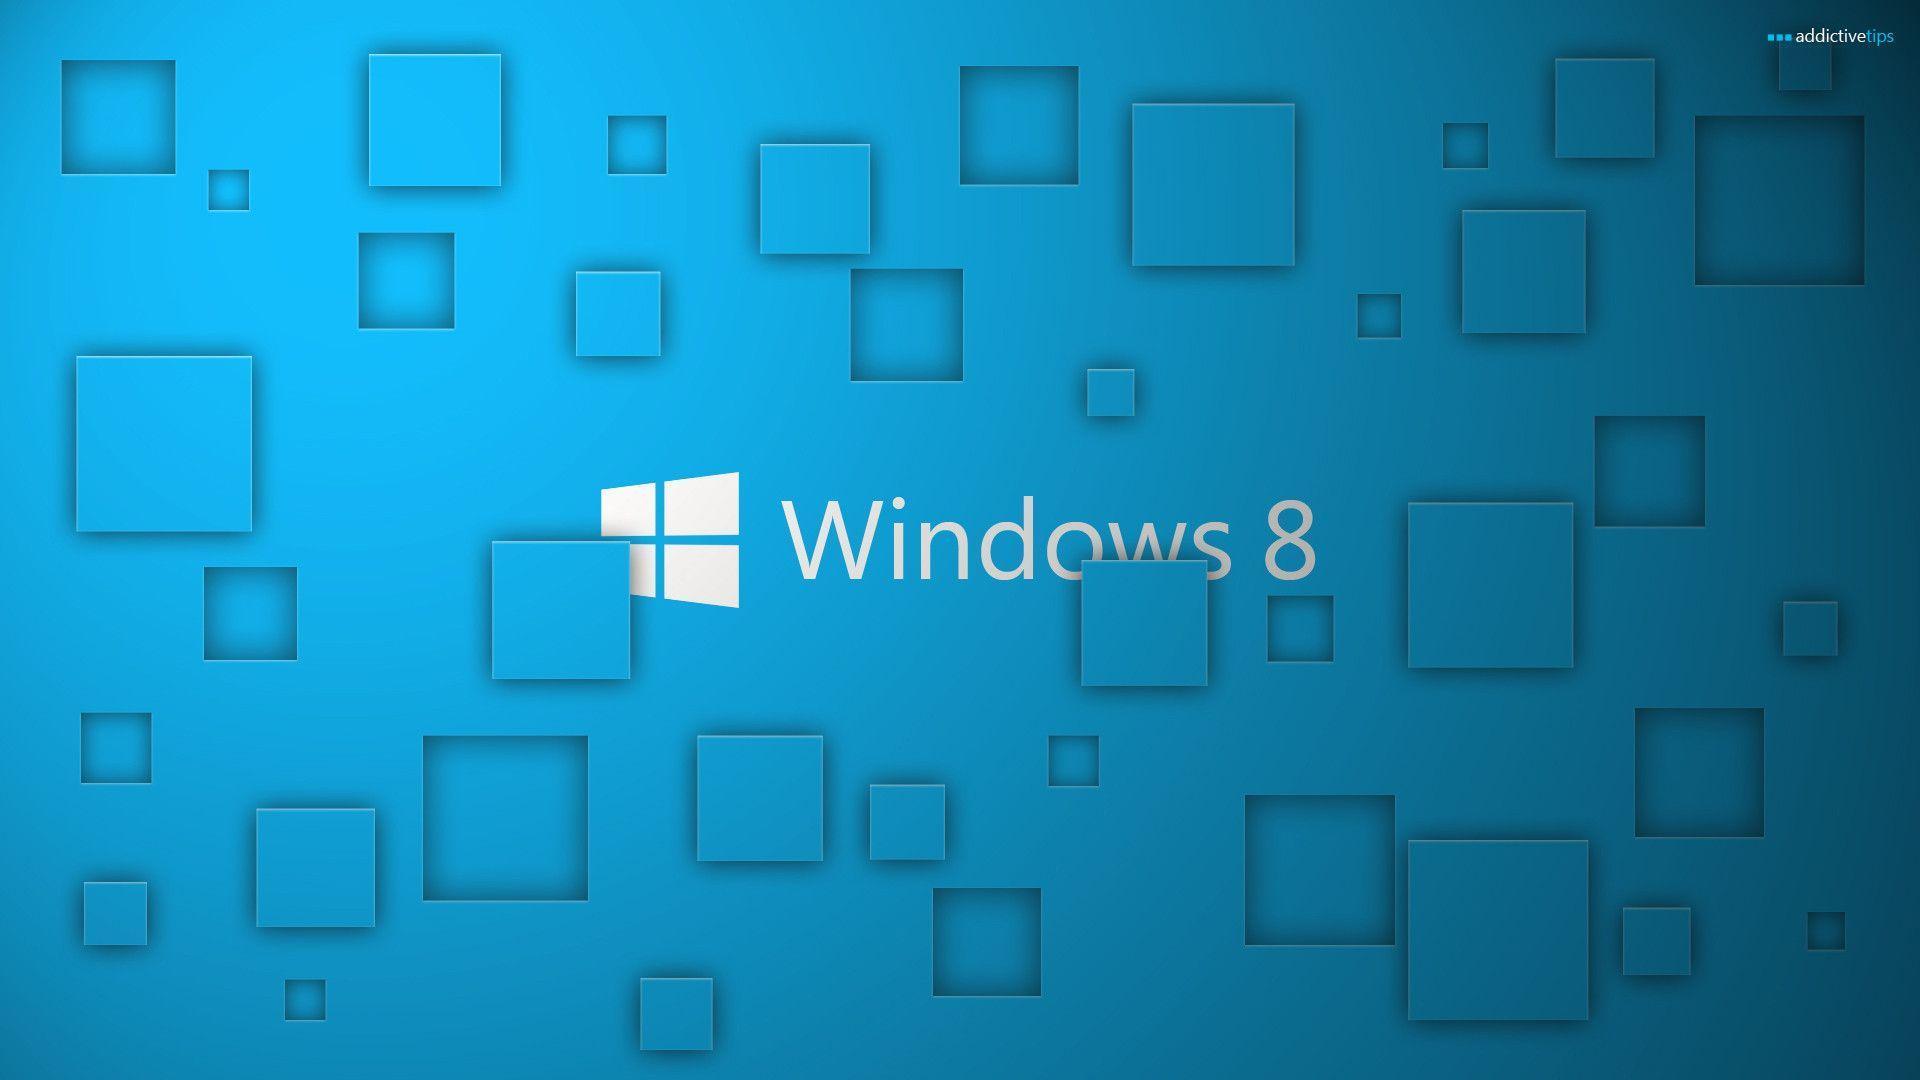 Windows 8. Awesome Wallpaper